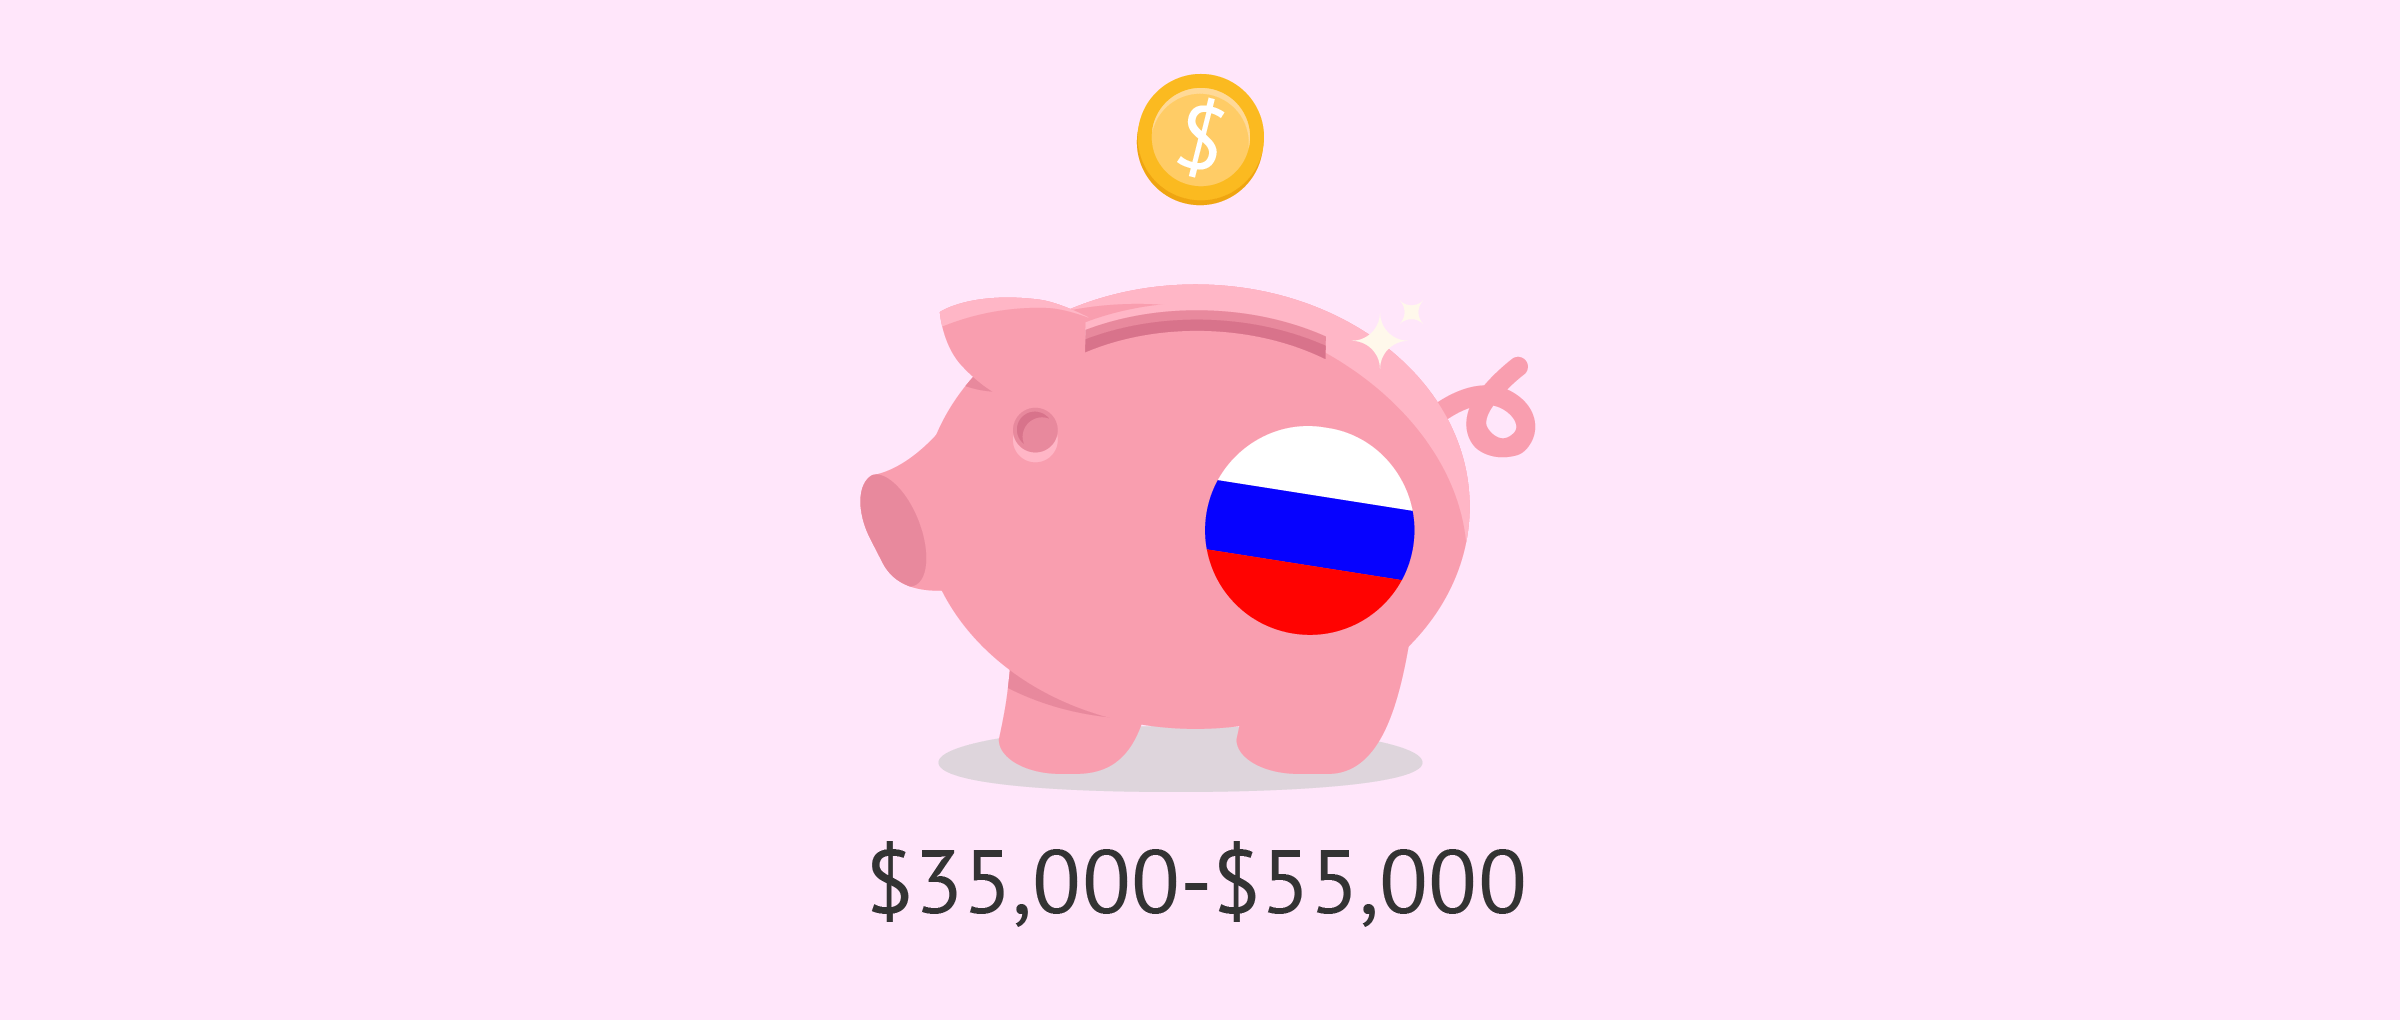 Surrogacy cost in Russia